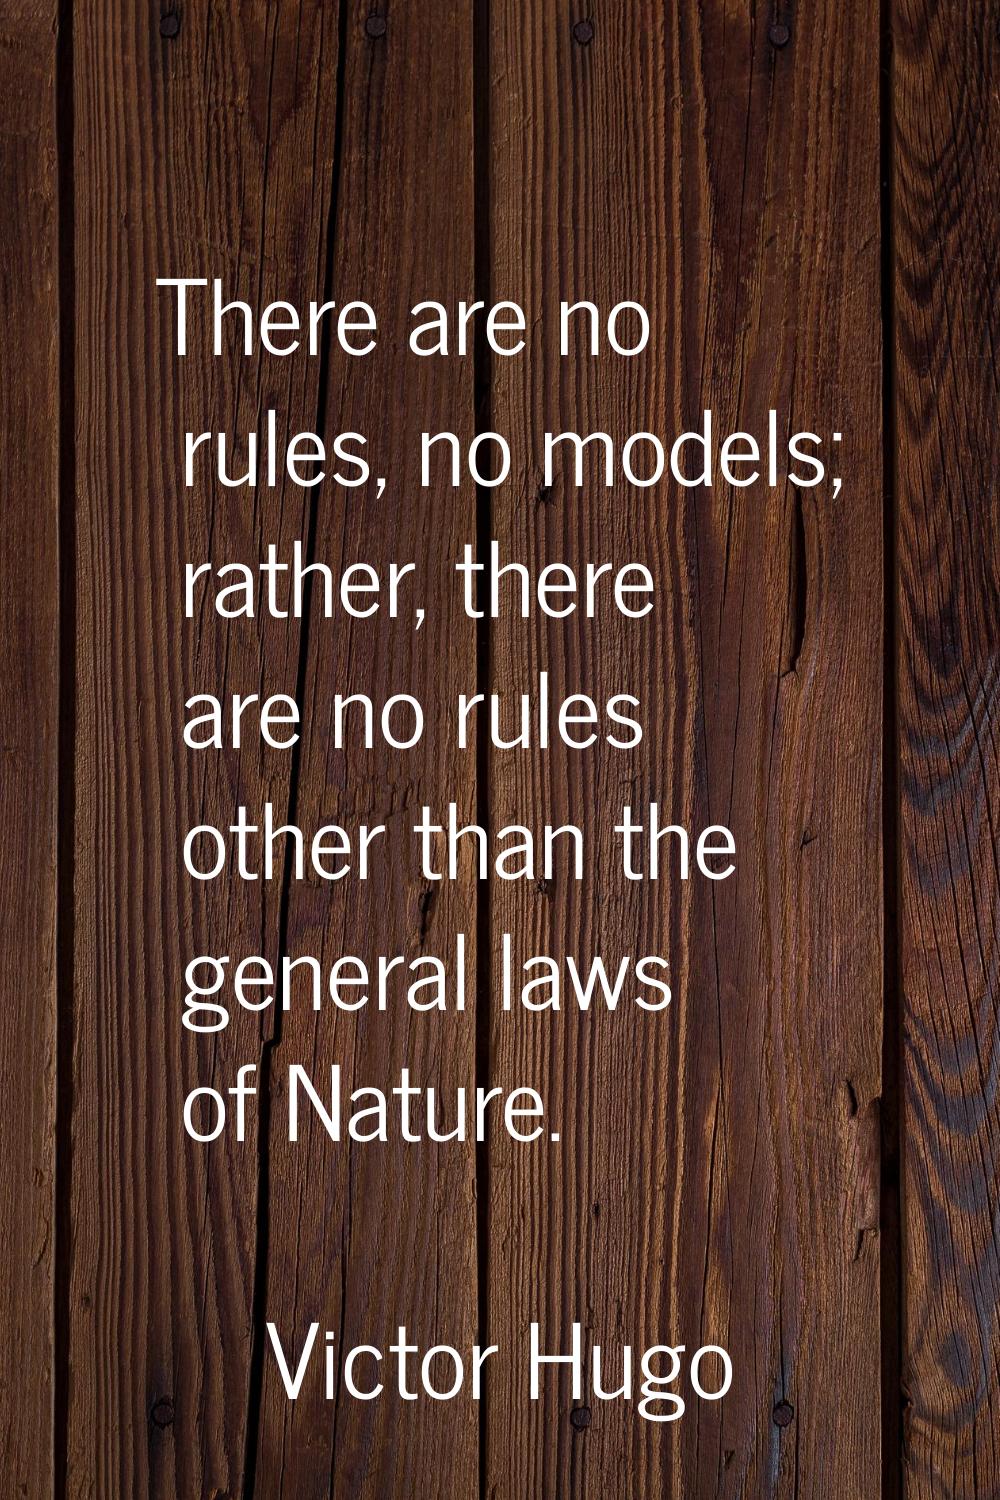 There are no rules, no models; rather, there are no rules other than the general laws of Nature.